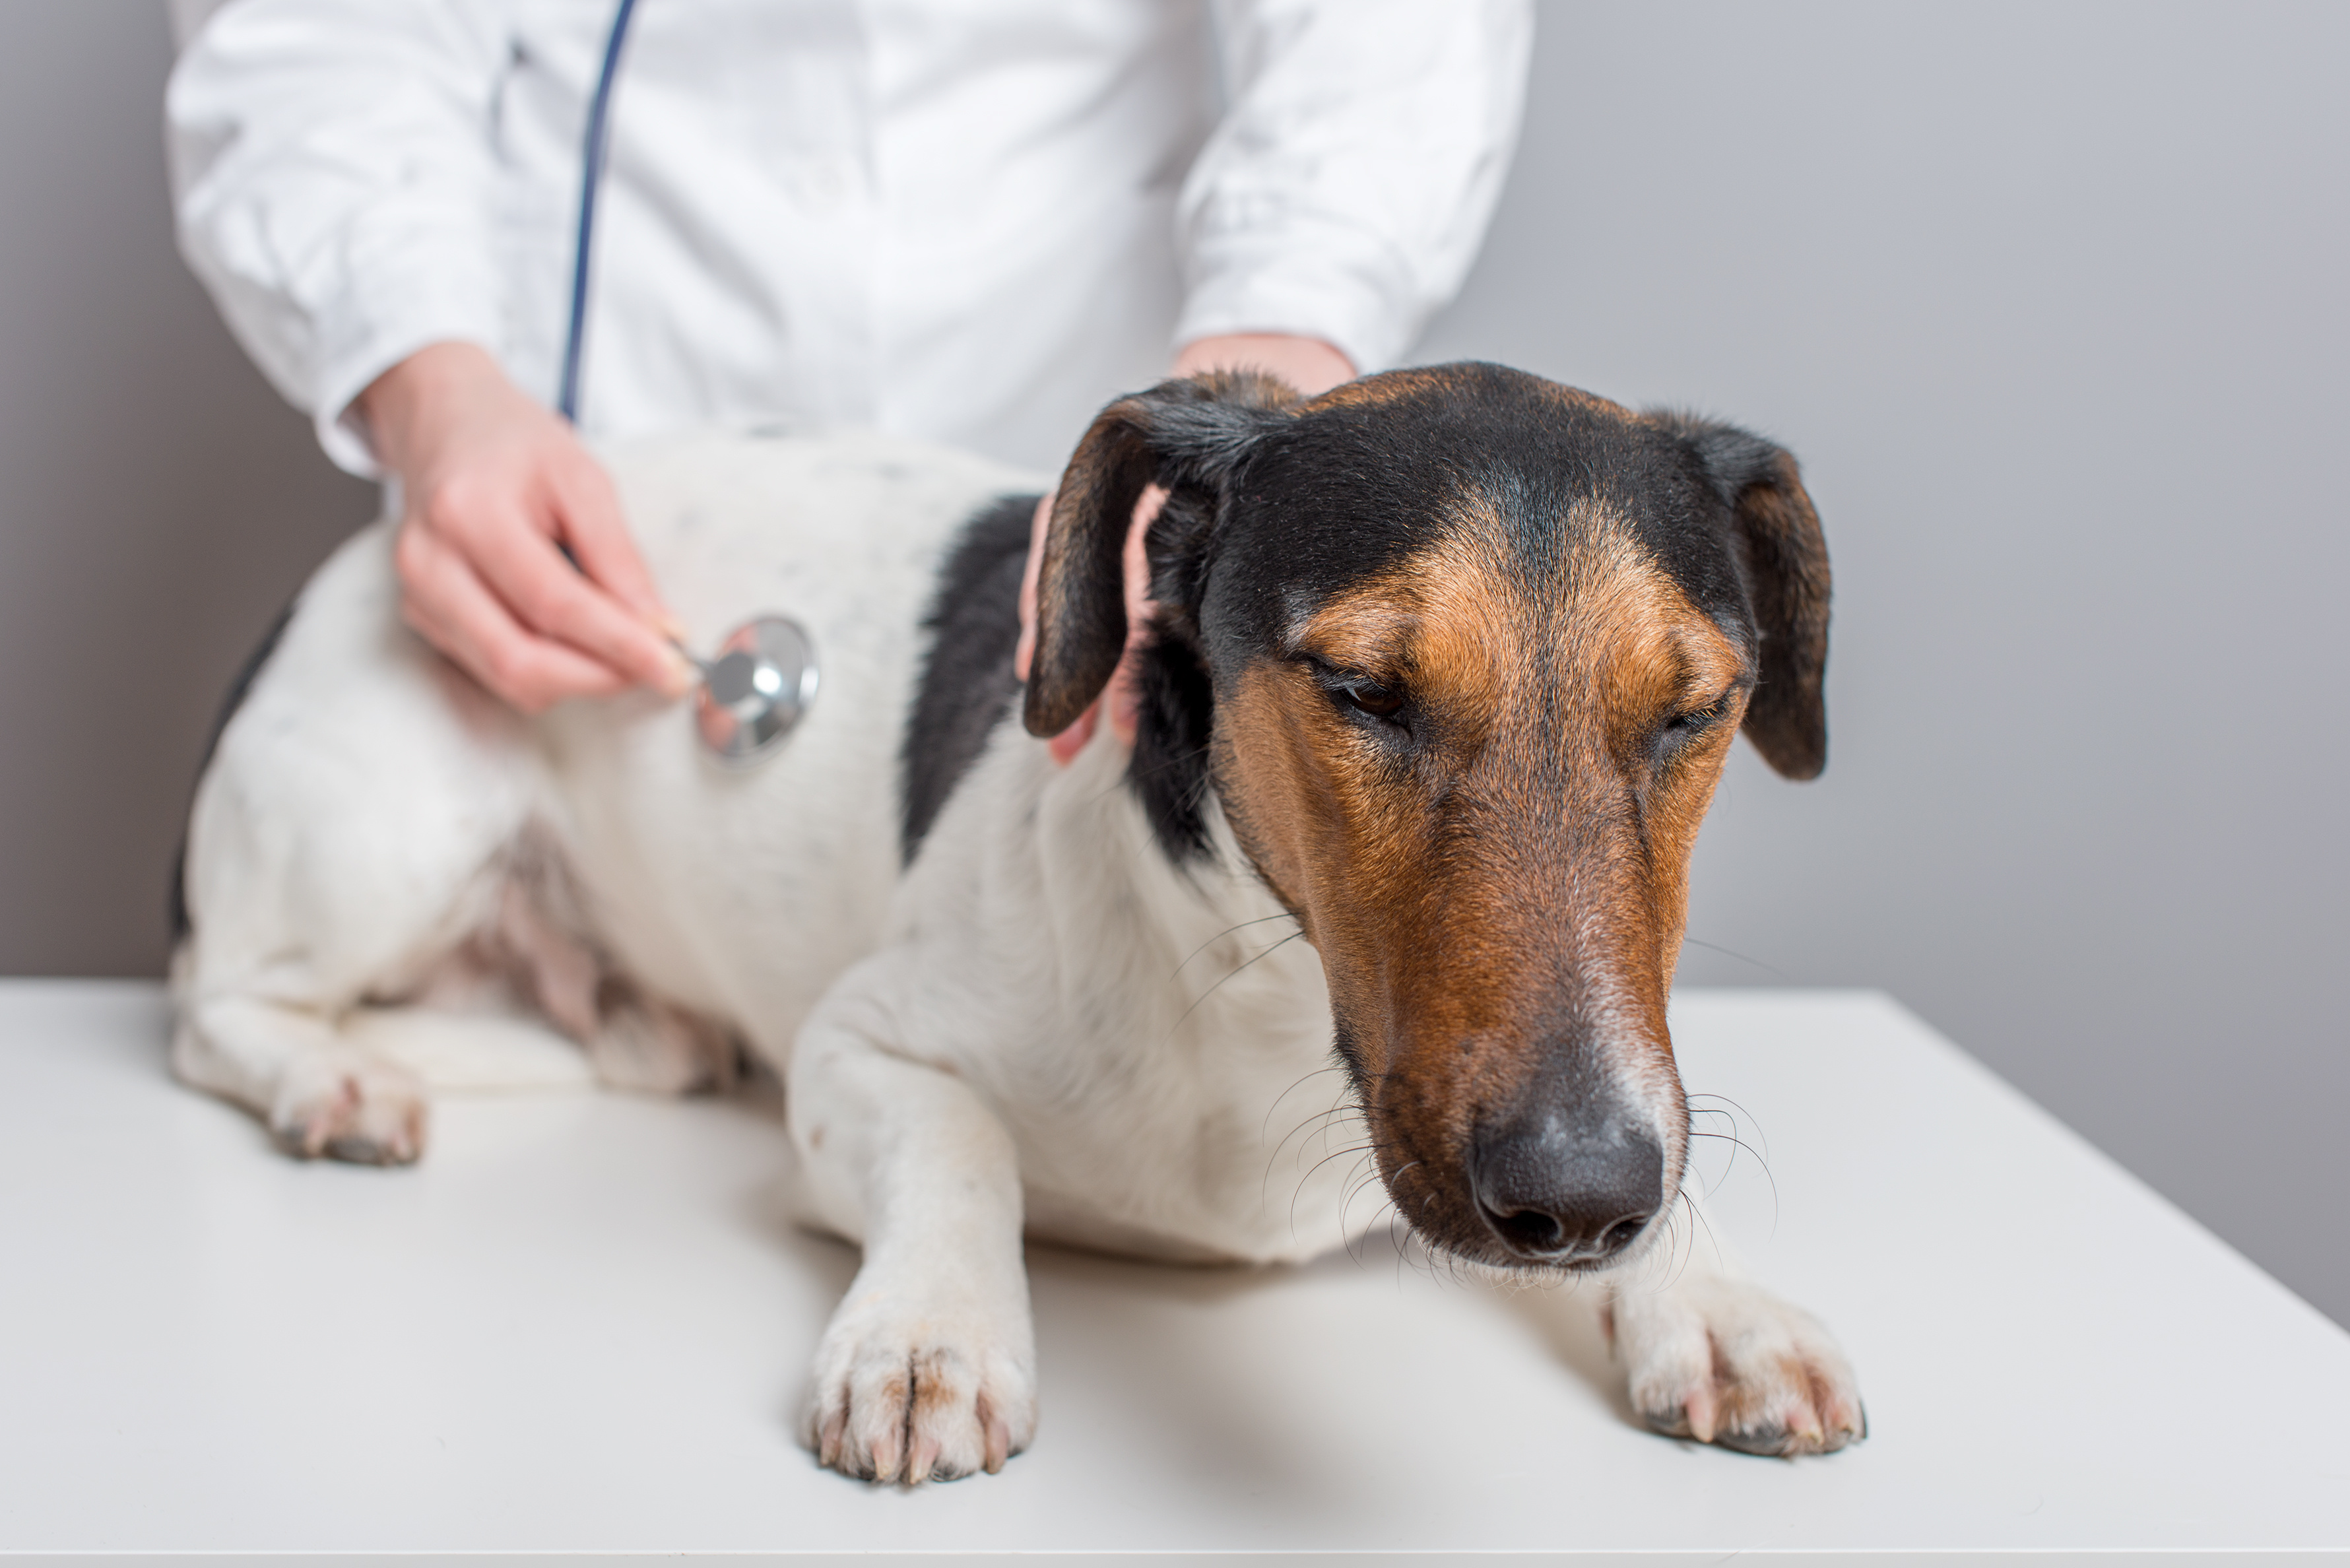 Vets Keep Close Watch on Canine Disease